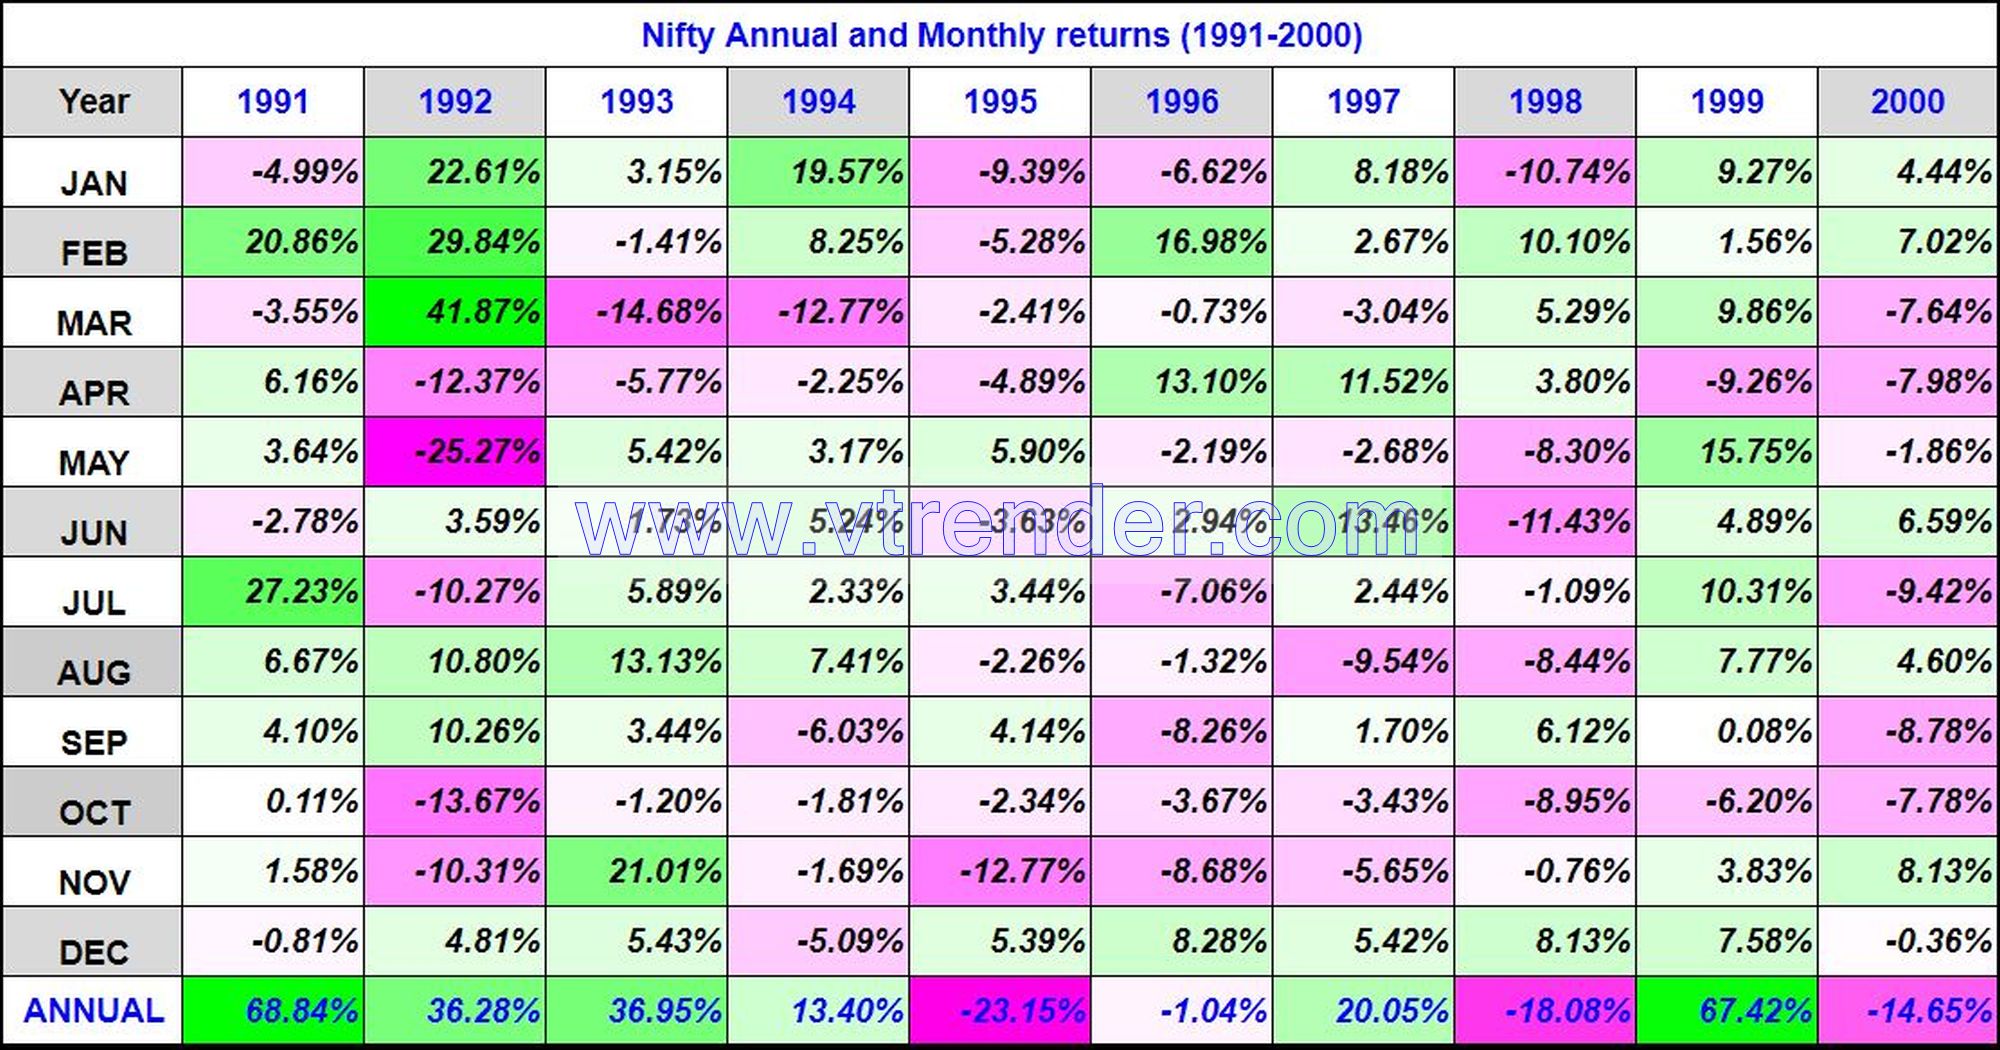 Niftyreturns1991 2000 Nifty 50 Monthly And Annual Returns (1991-2023) Updated 24Th Mar 2023 Annual, Monthly, Nifty Returns